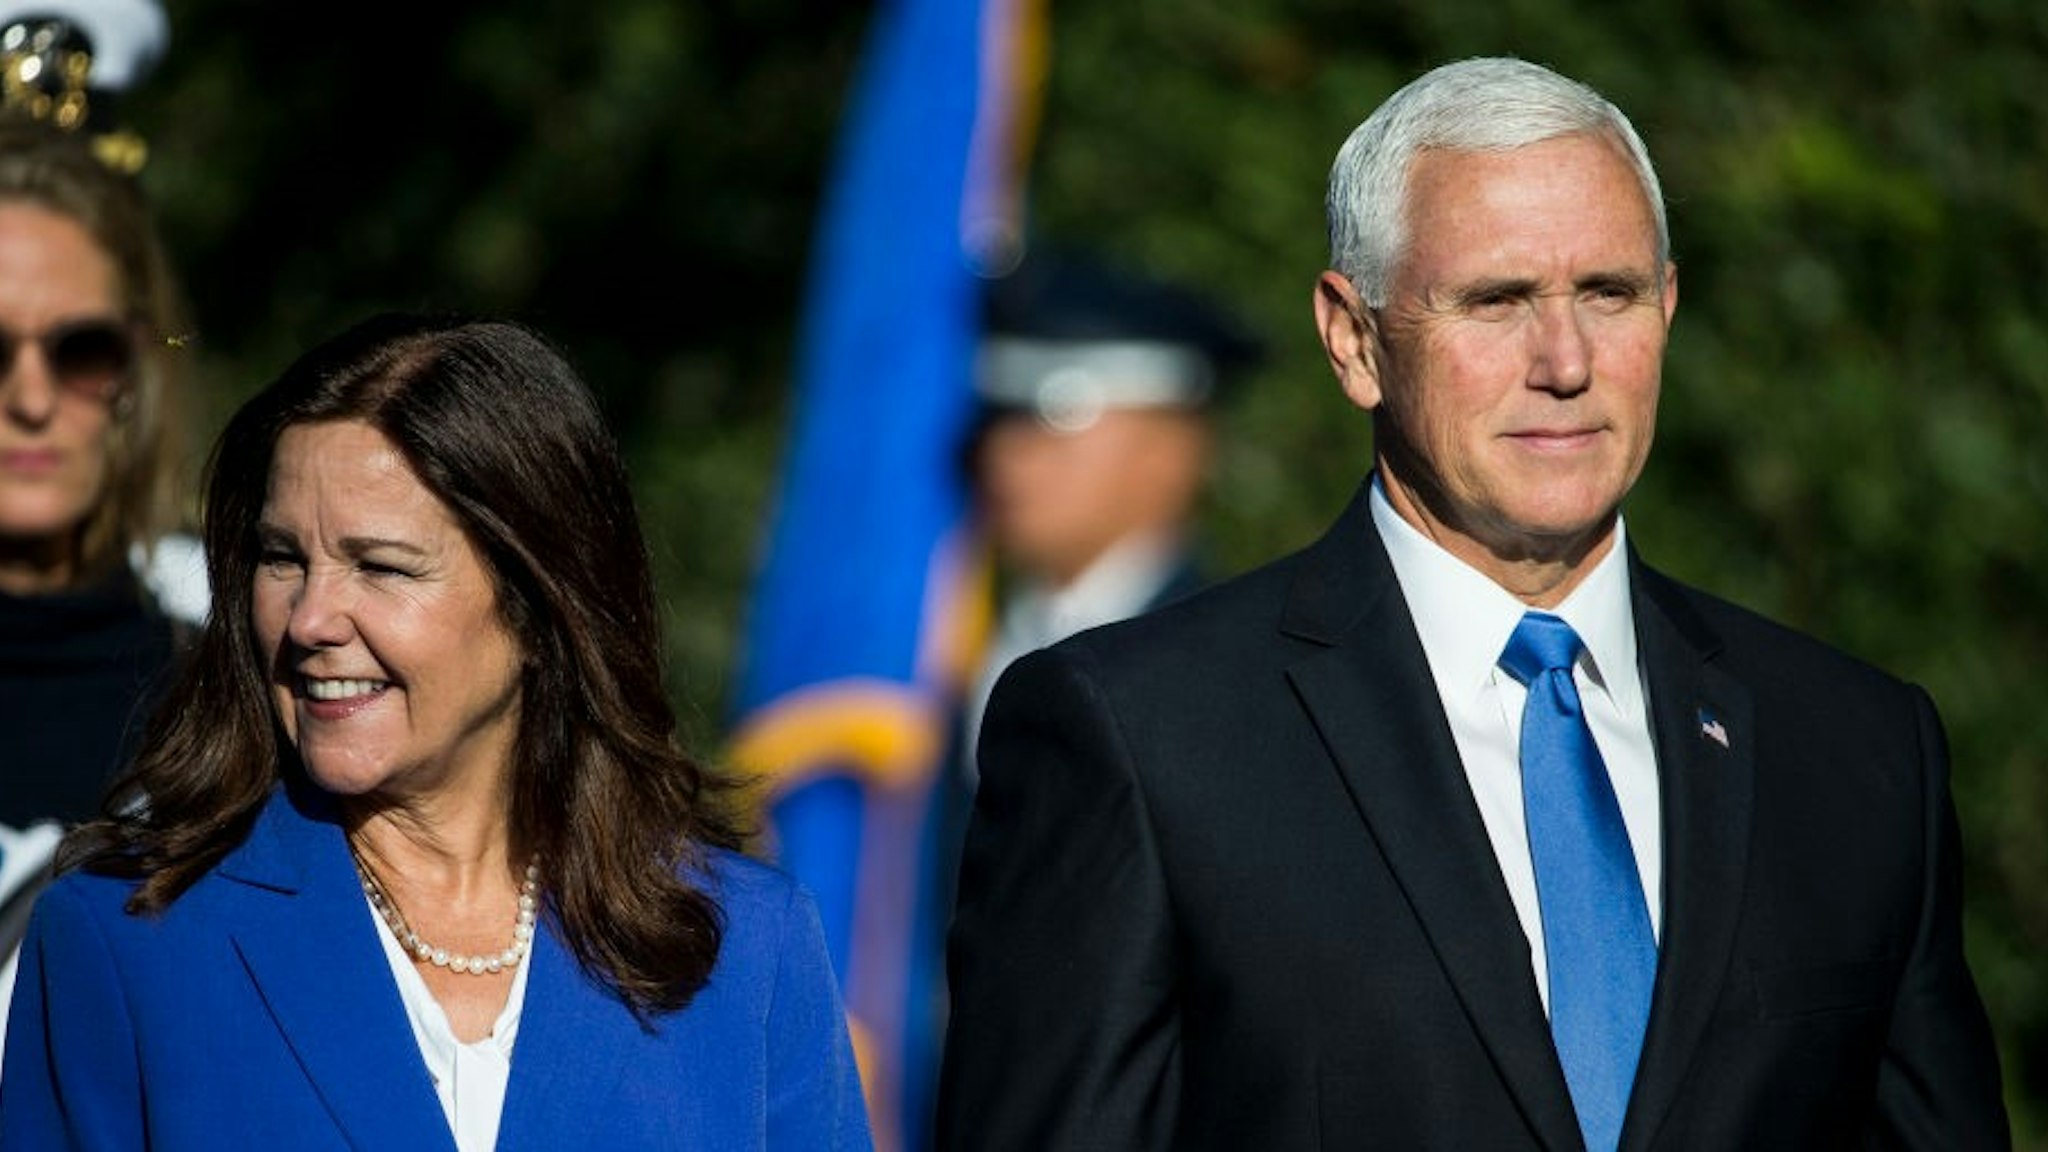 WASHINGTON, DC - SEPTEMBER 20: U.S. Second Lady Karen Pence and Vice President Mike Pence attend an official visit ceremony welcoming Australian Prime Minister Scott Morrison and Australian first lady Jennifer Morrison at the South Lawn at the White House September 20, 2019 in Washington, DC. Prime Minister Morrison will participate in an Oval Office meeting, a joint news conference, and a state dinner during his state visit in Washington. (Photo by